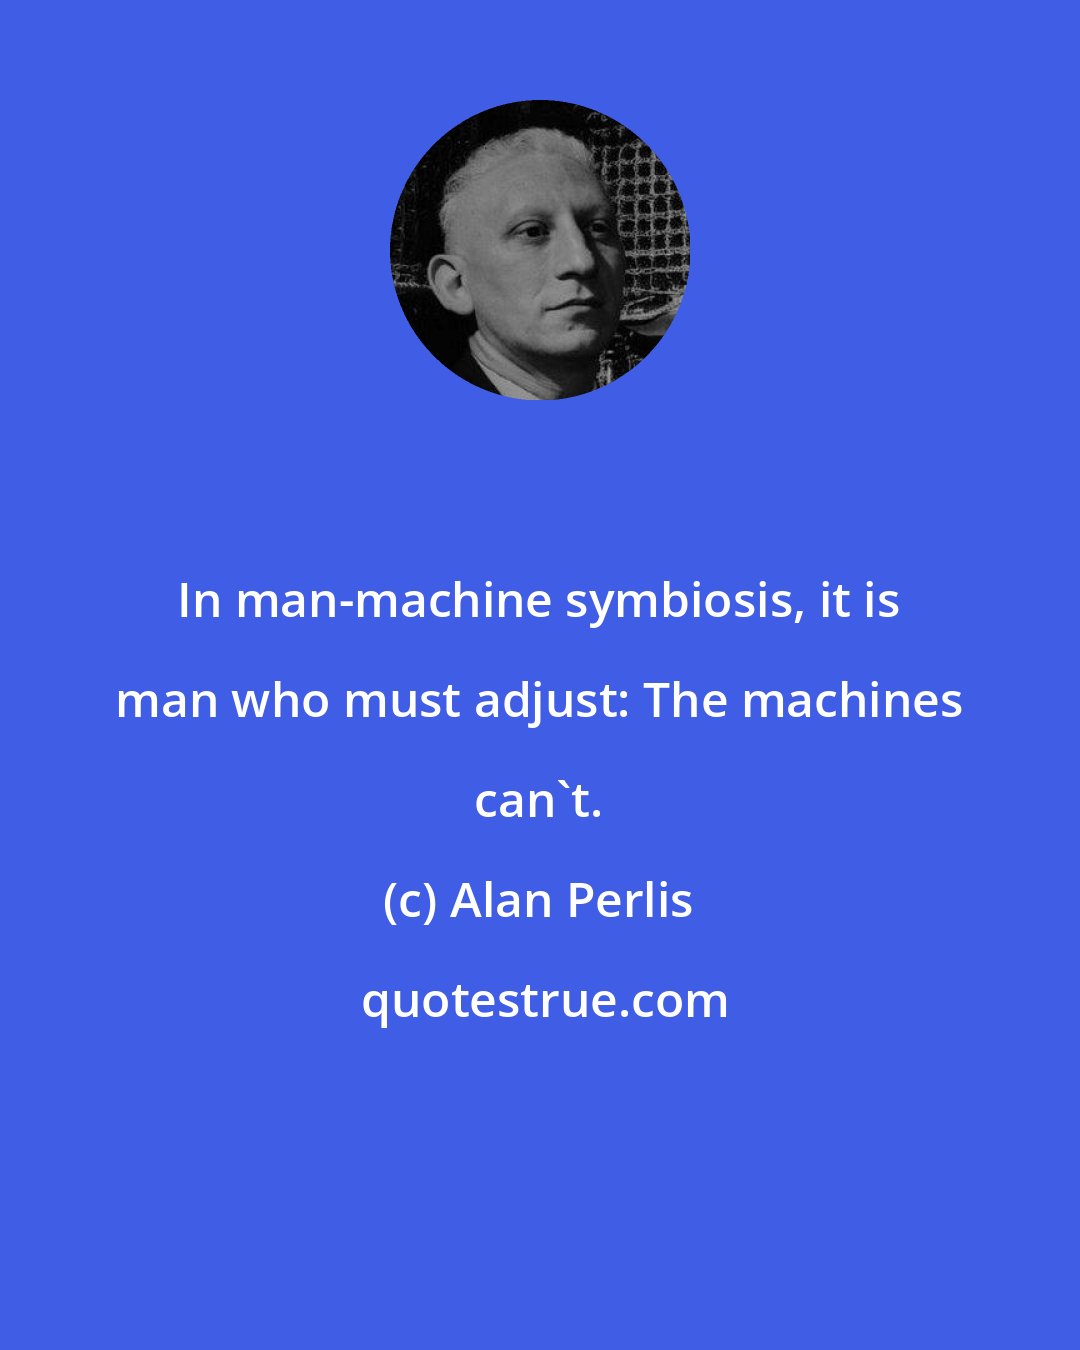 Alan Perlis: In man-machine symbiosis, it is man who must adjust: The machines can't.